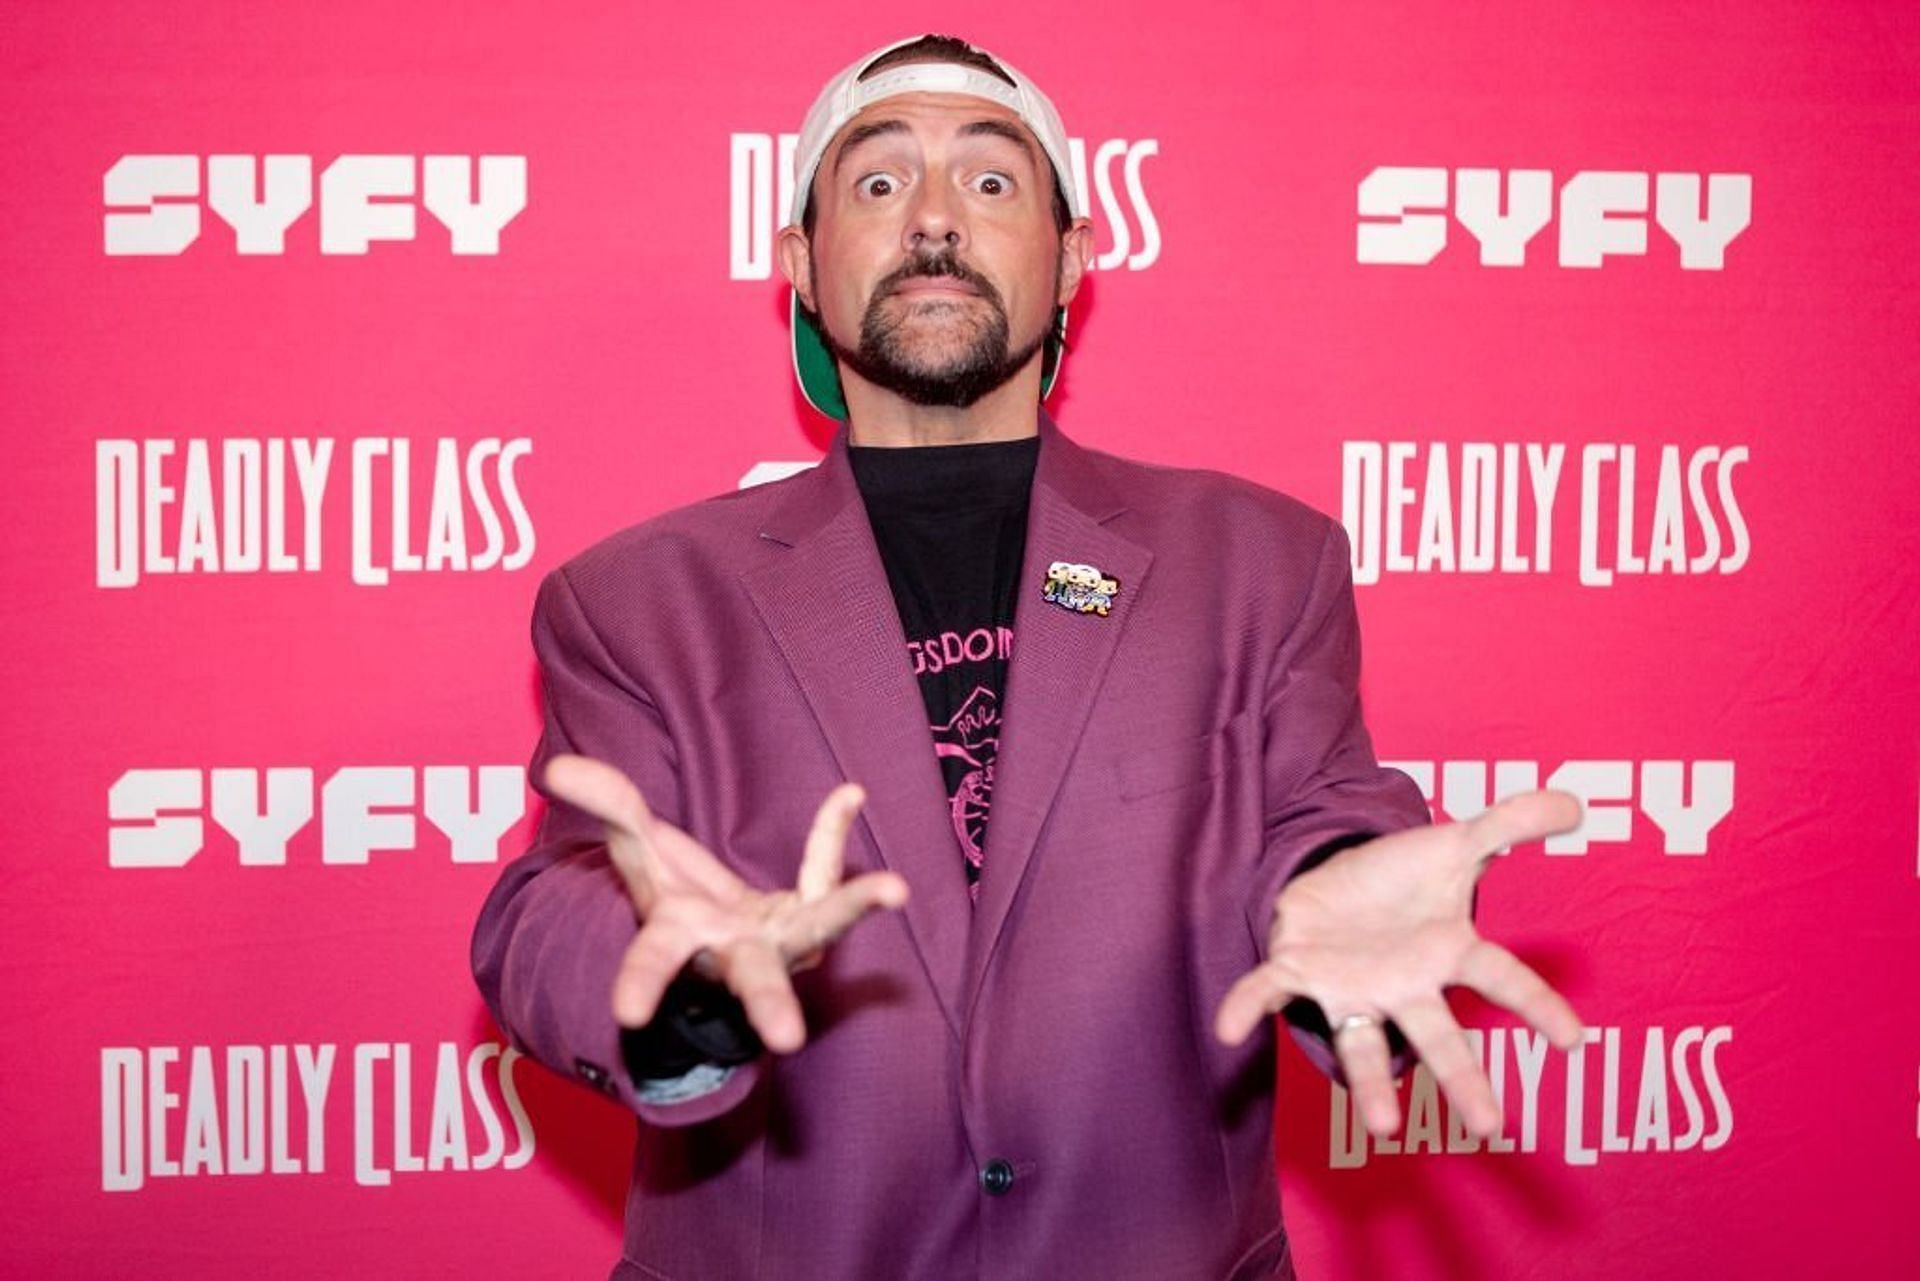 Kevin Smith has earned a lot from his career in the entertainment industry (Image via Paul Butterfield/Getty Images)